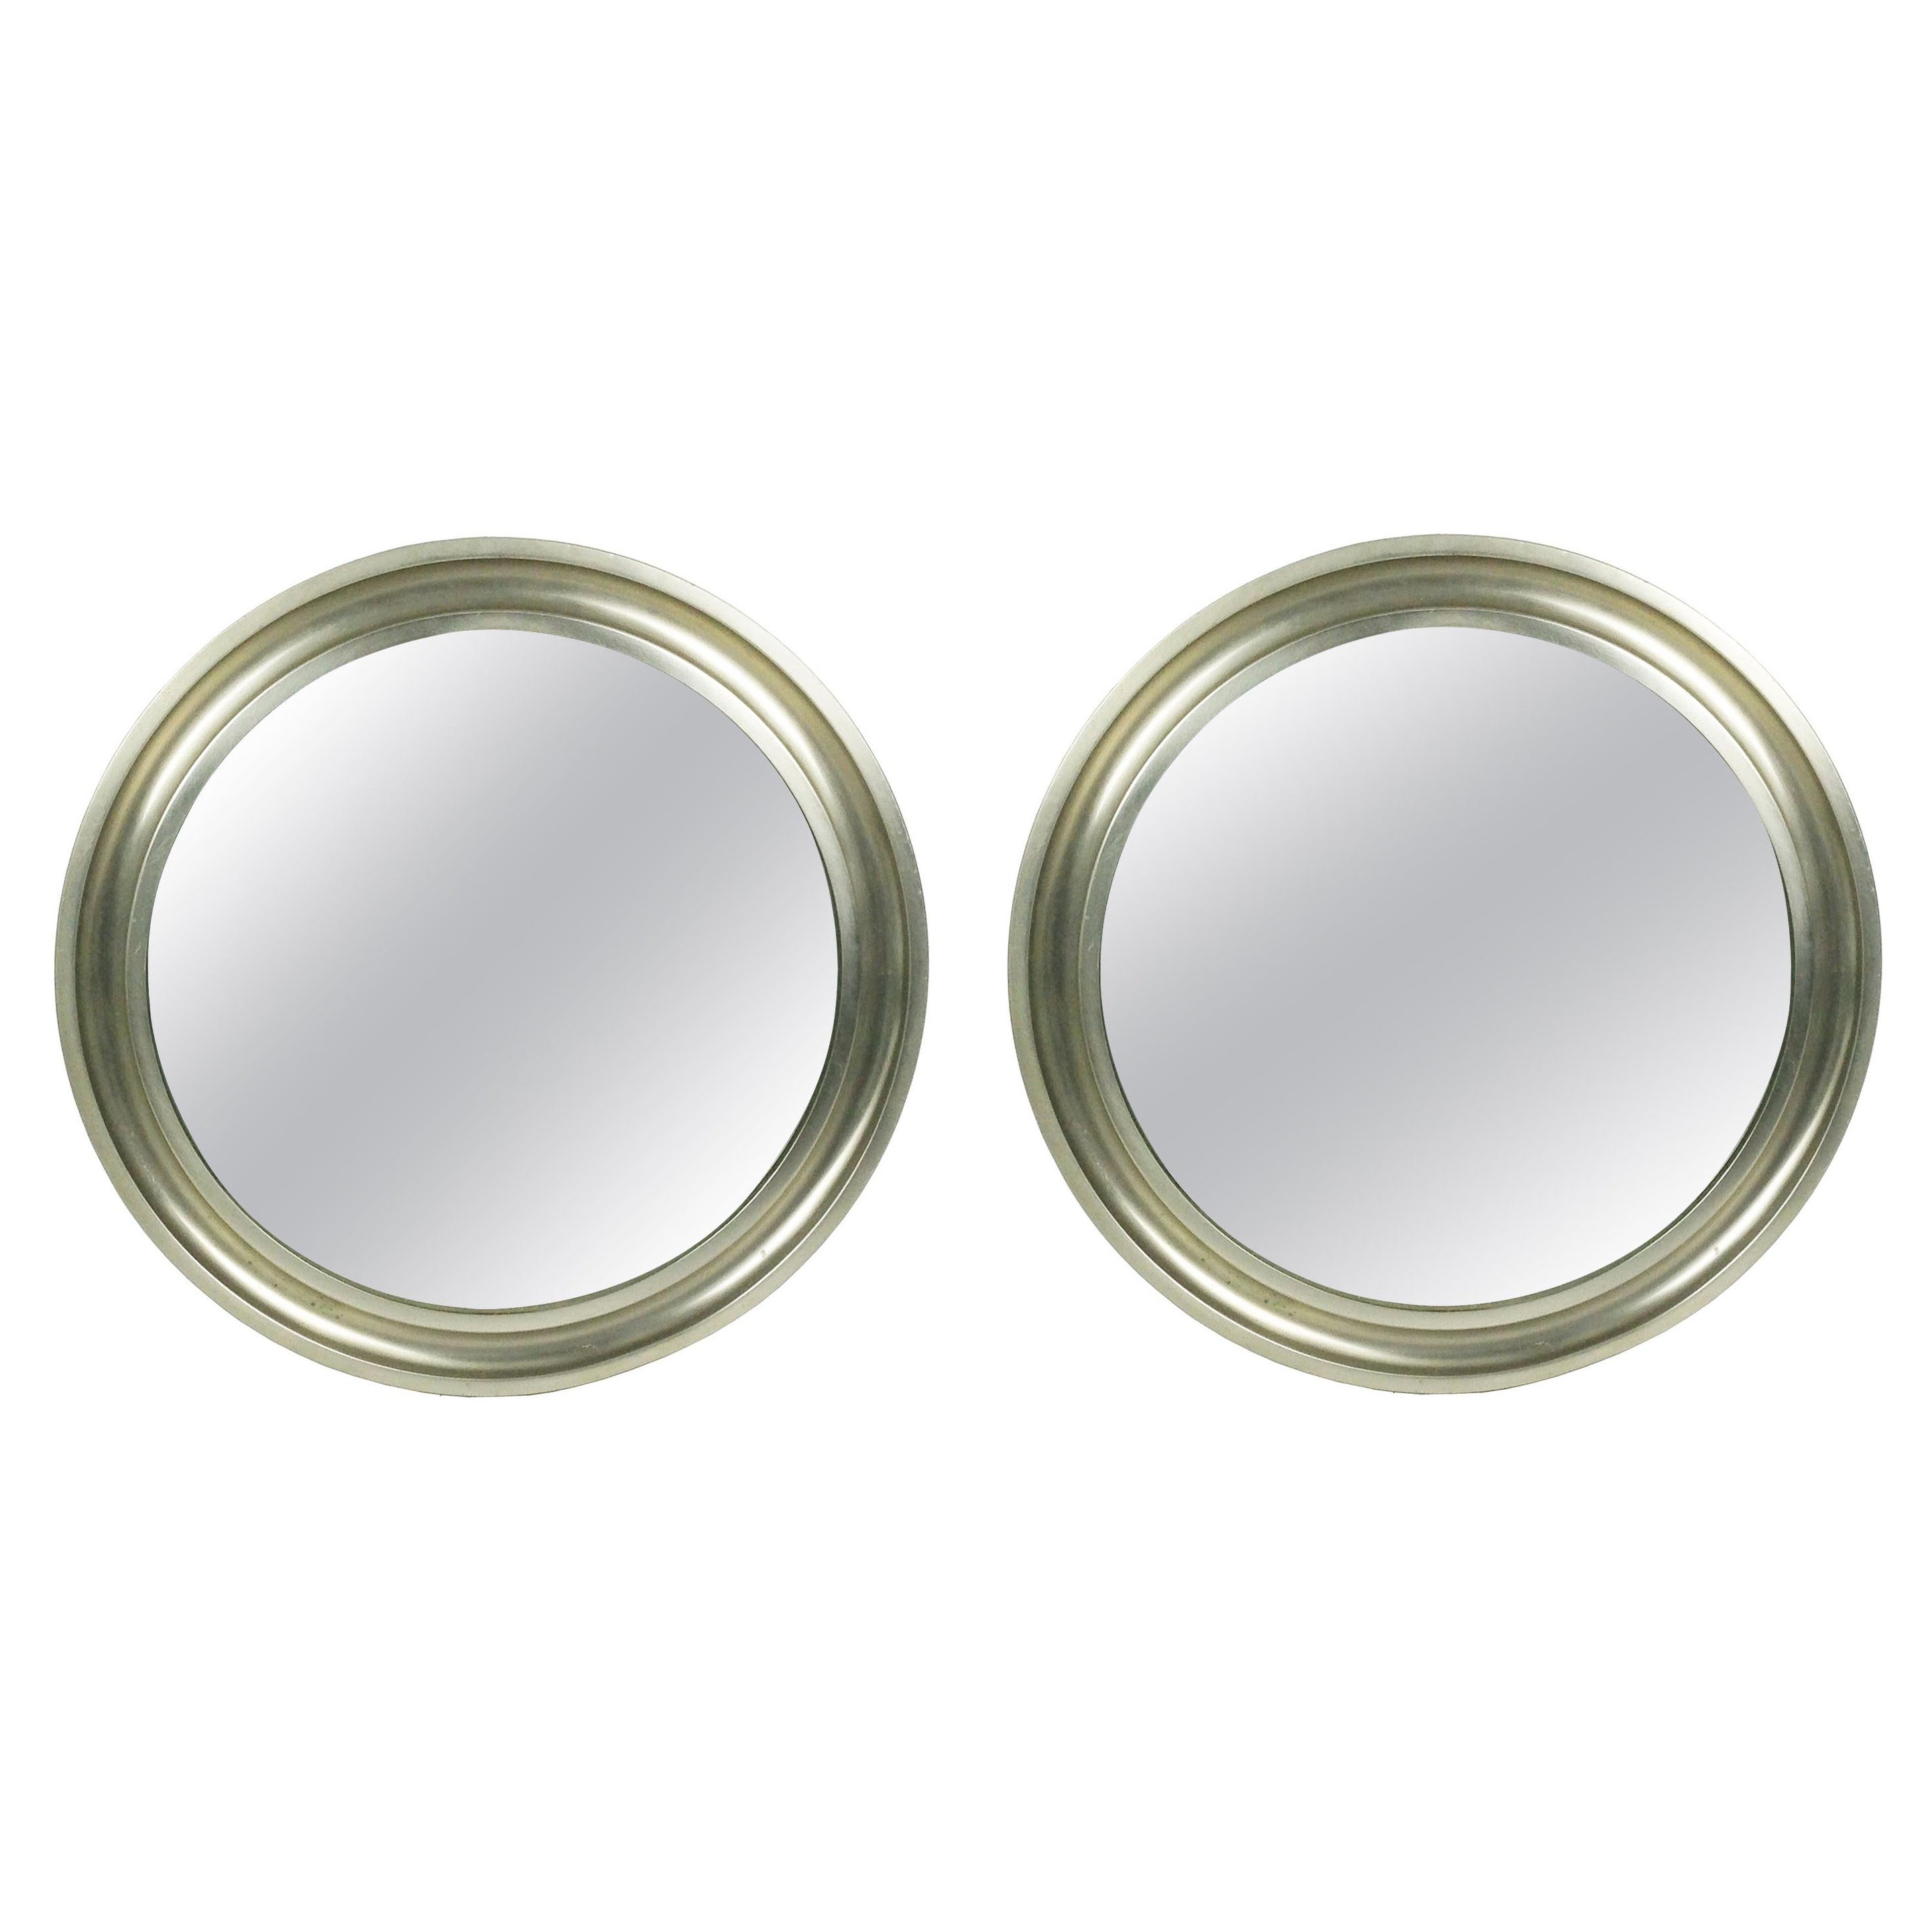 Pair of Nickeled and Black Metal small Specchio Mirrors by S. Mazza for Artemide For Sale